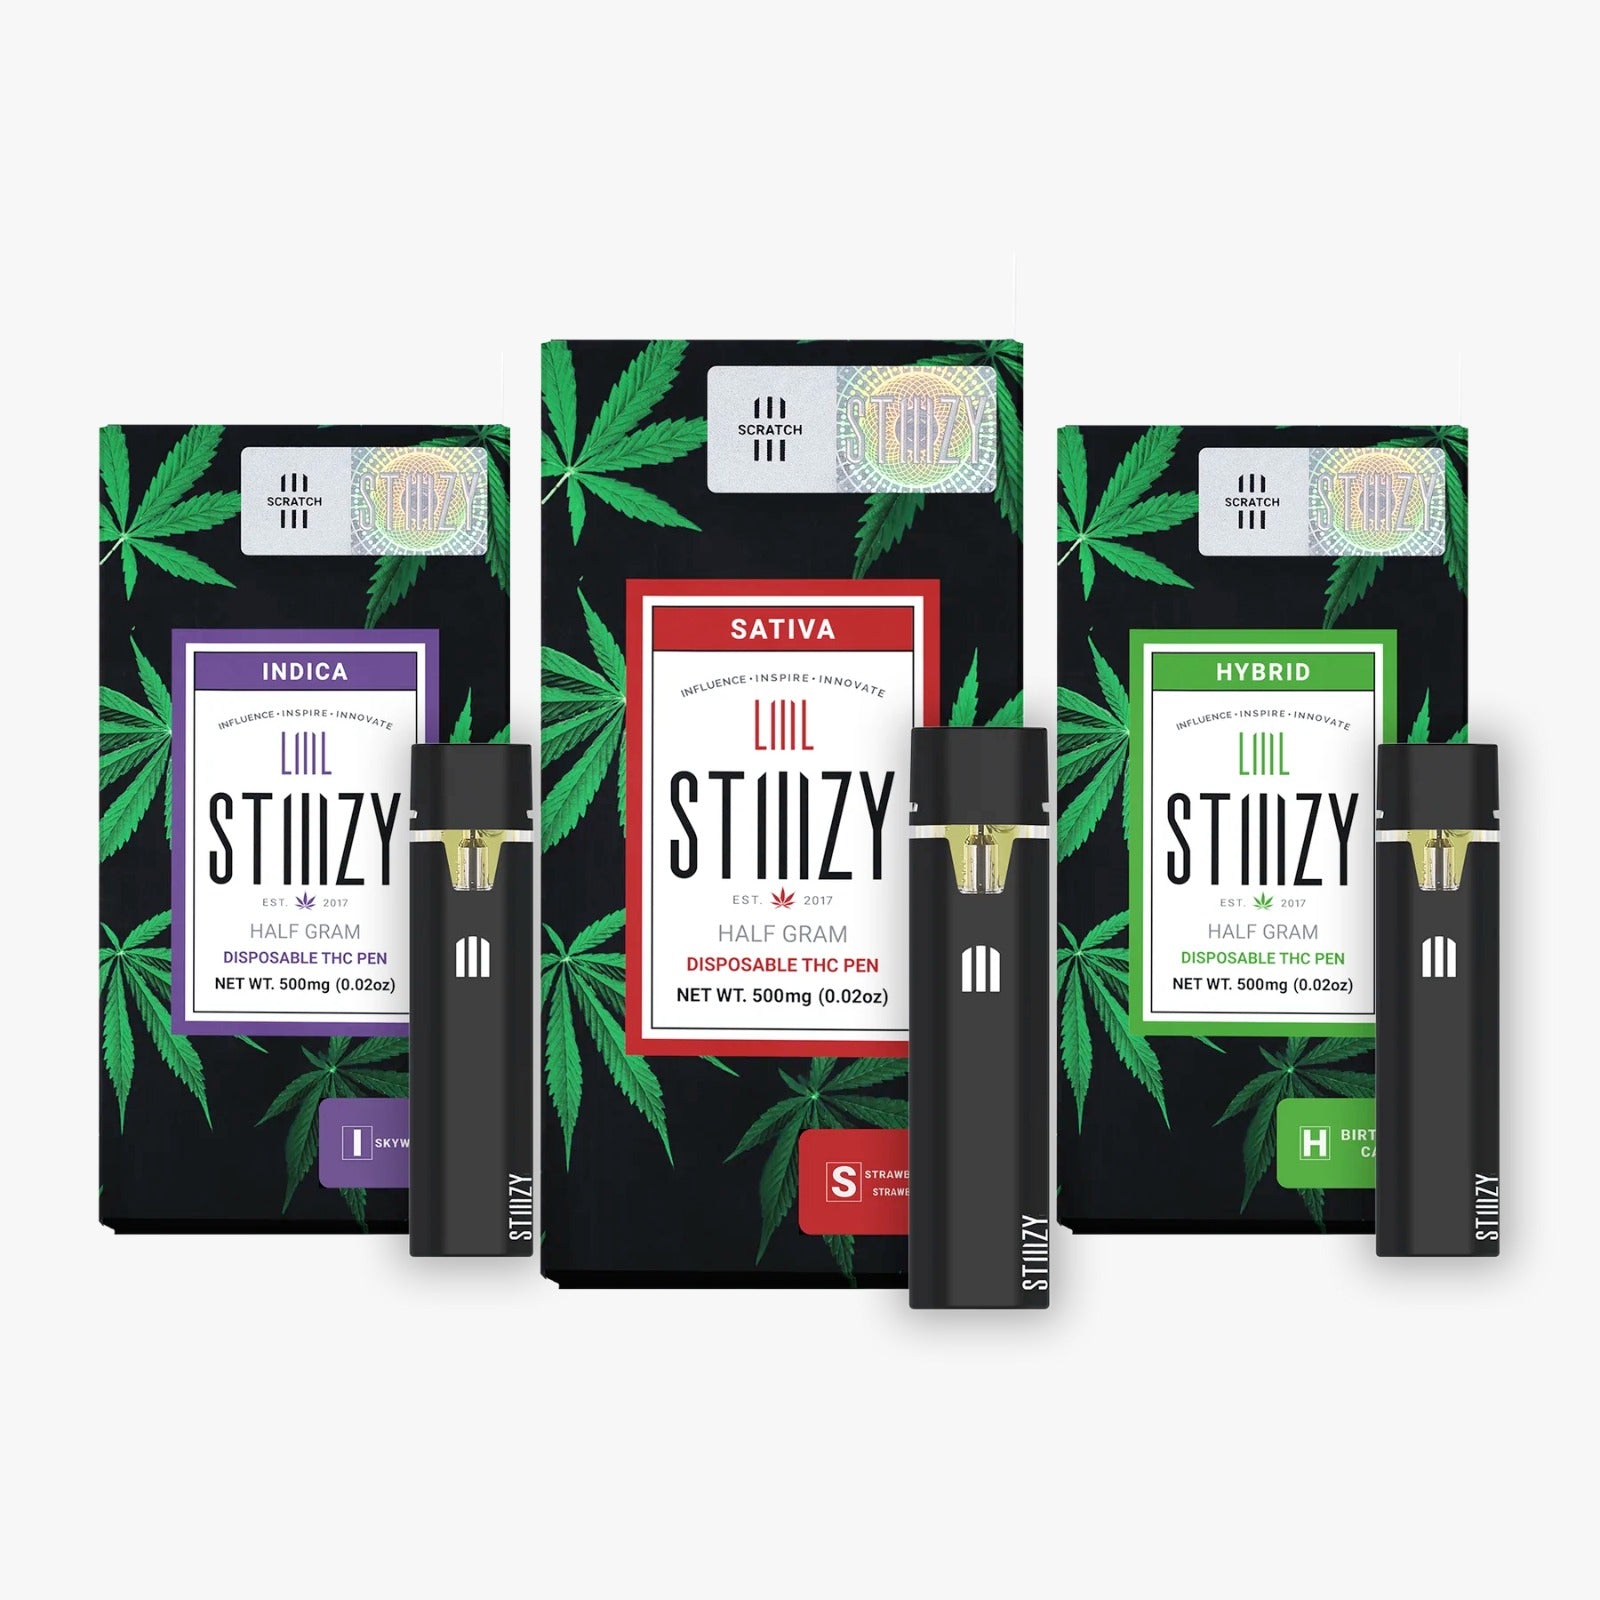 Three disposable all-in-one weed pens from STIIIZY stand next to their packages.